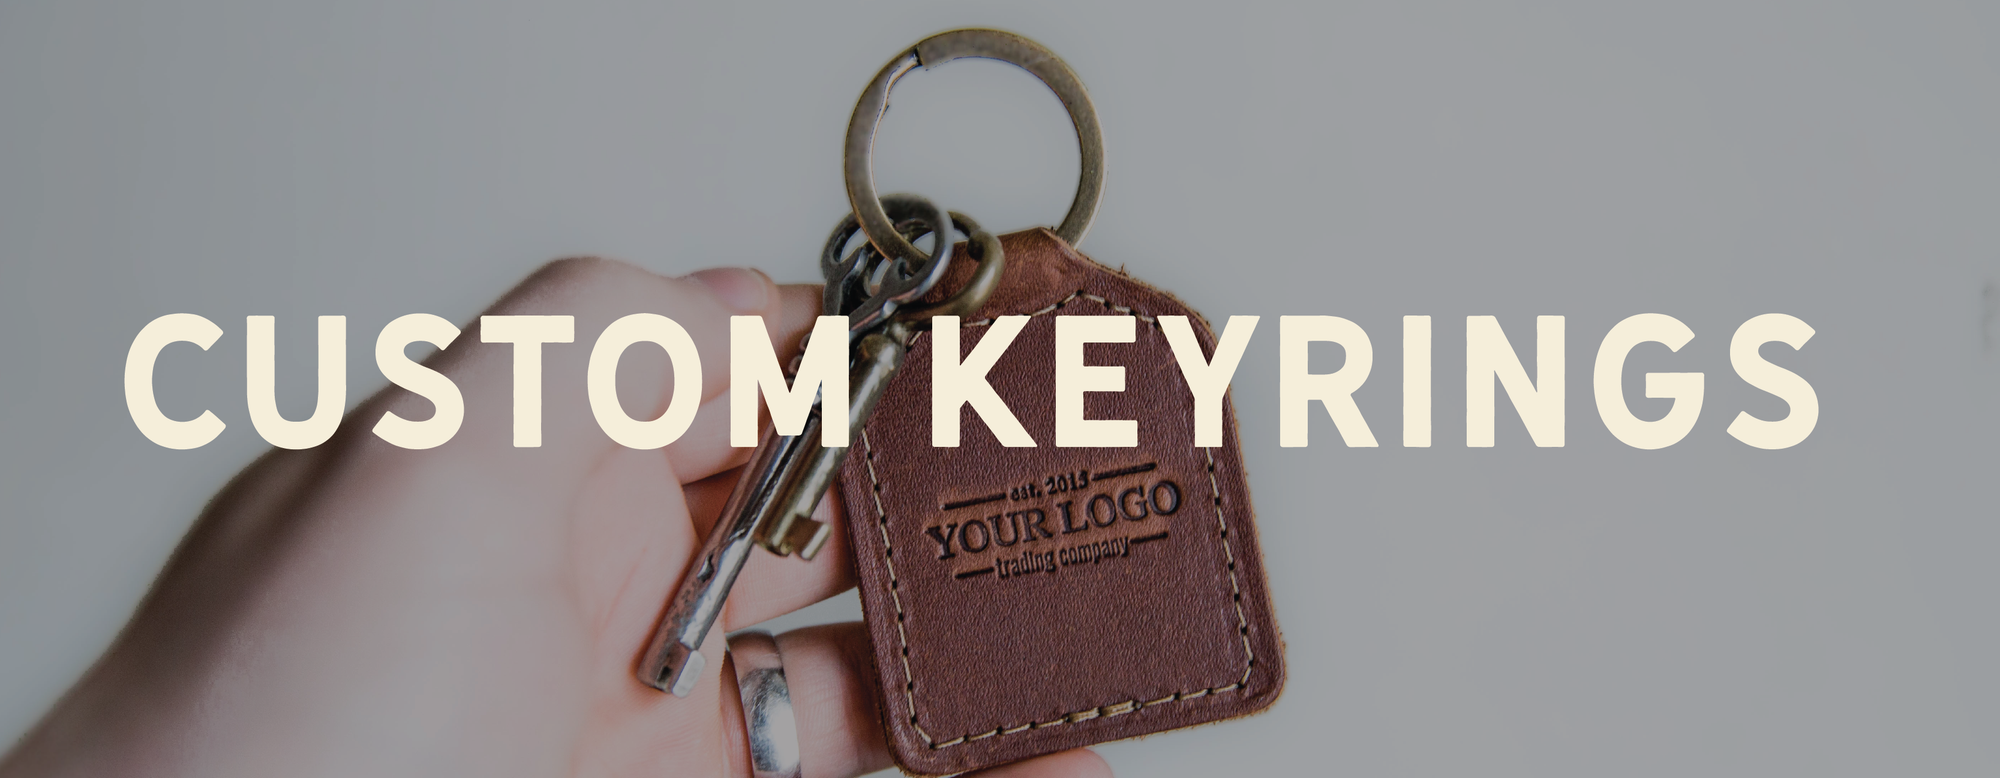 Corporate Keyrings and Travel